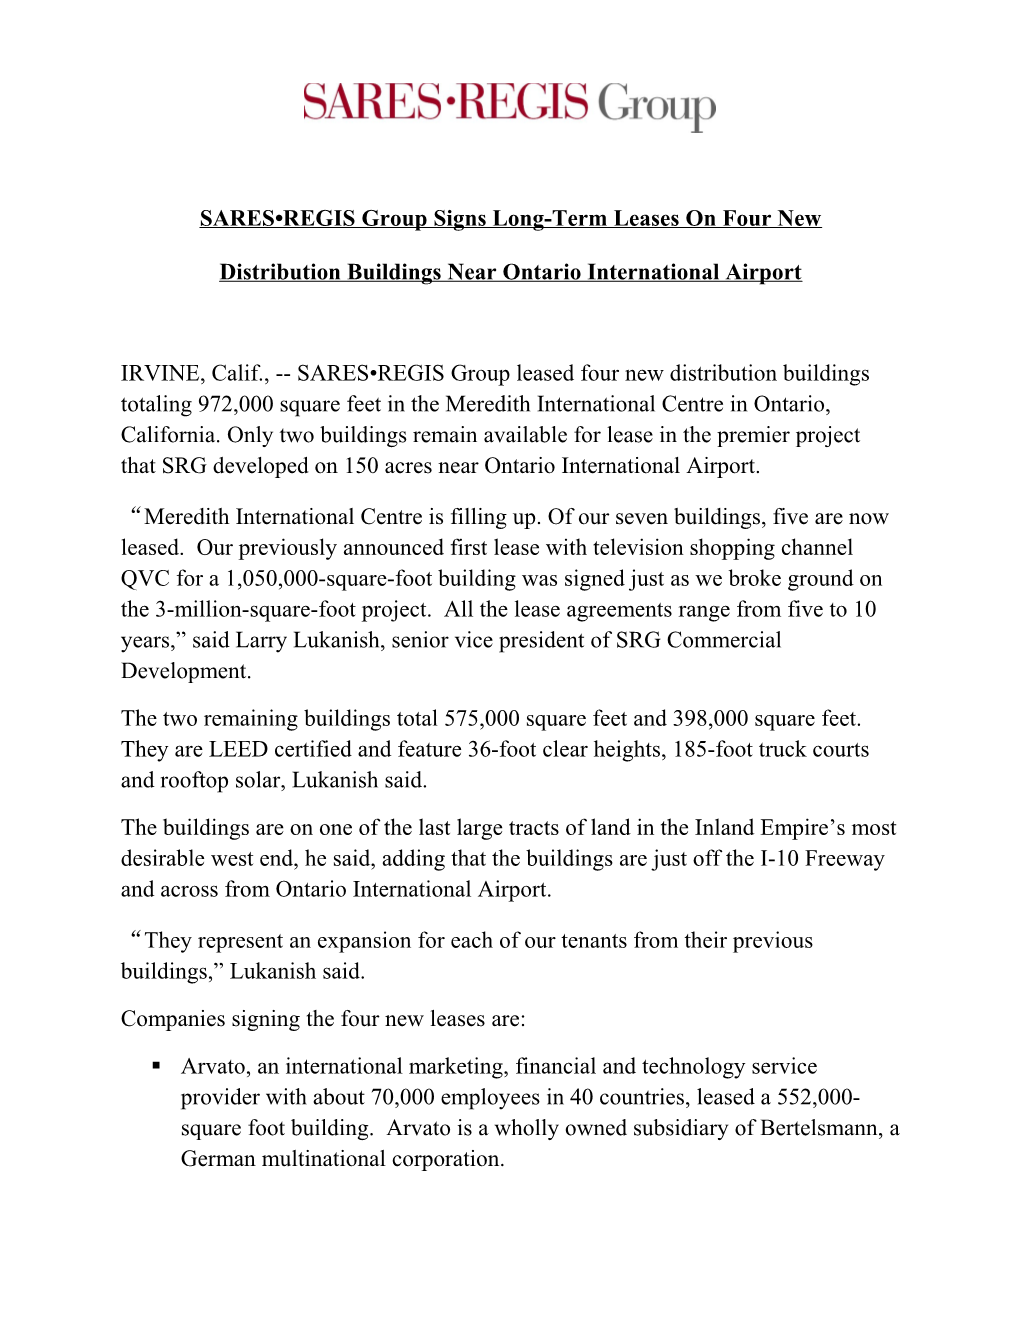 SARES REGIS Group Signs Long-Term Leases on Four New